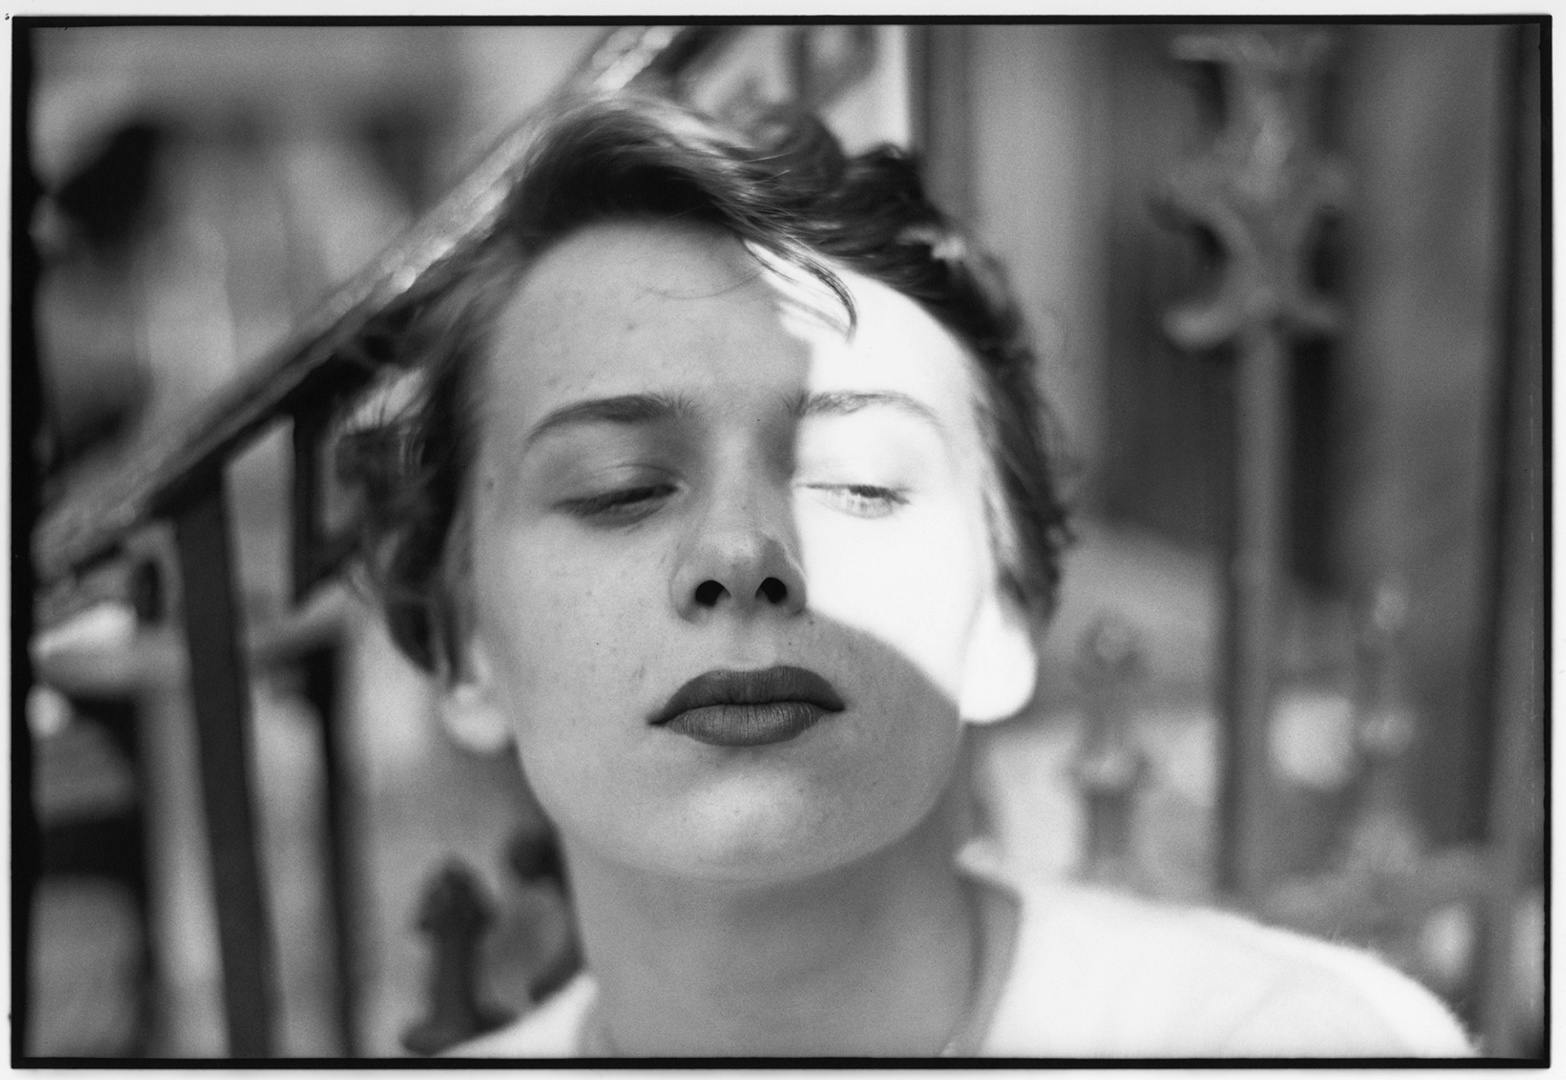 Black and white photograph by Saul Leiter of a woman with short hair glancing to the side with half of her face lit up and the other half in shadow